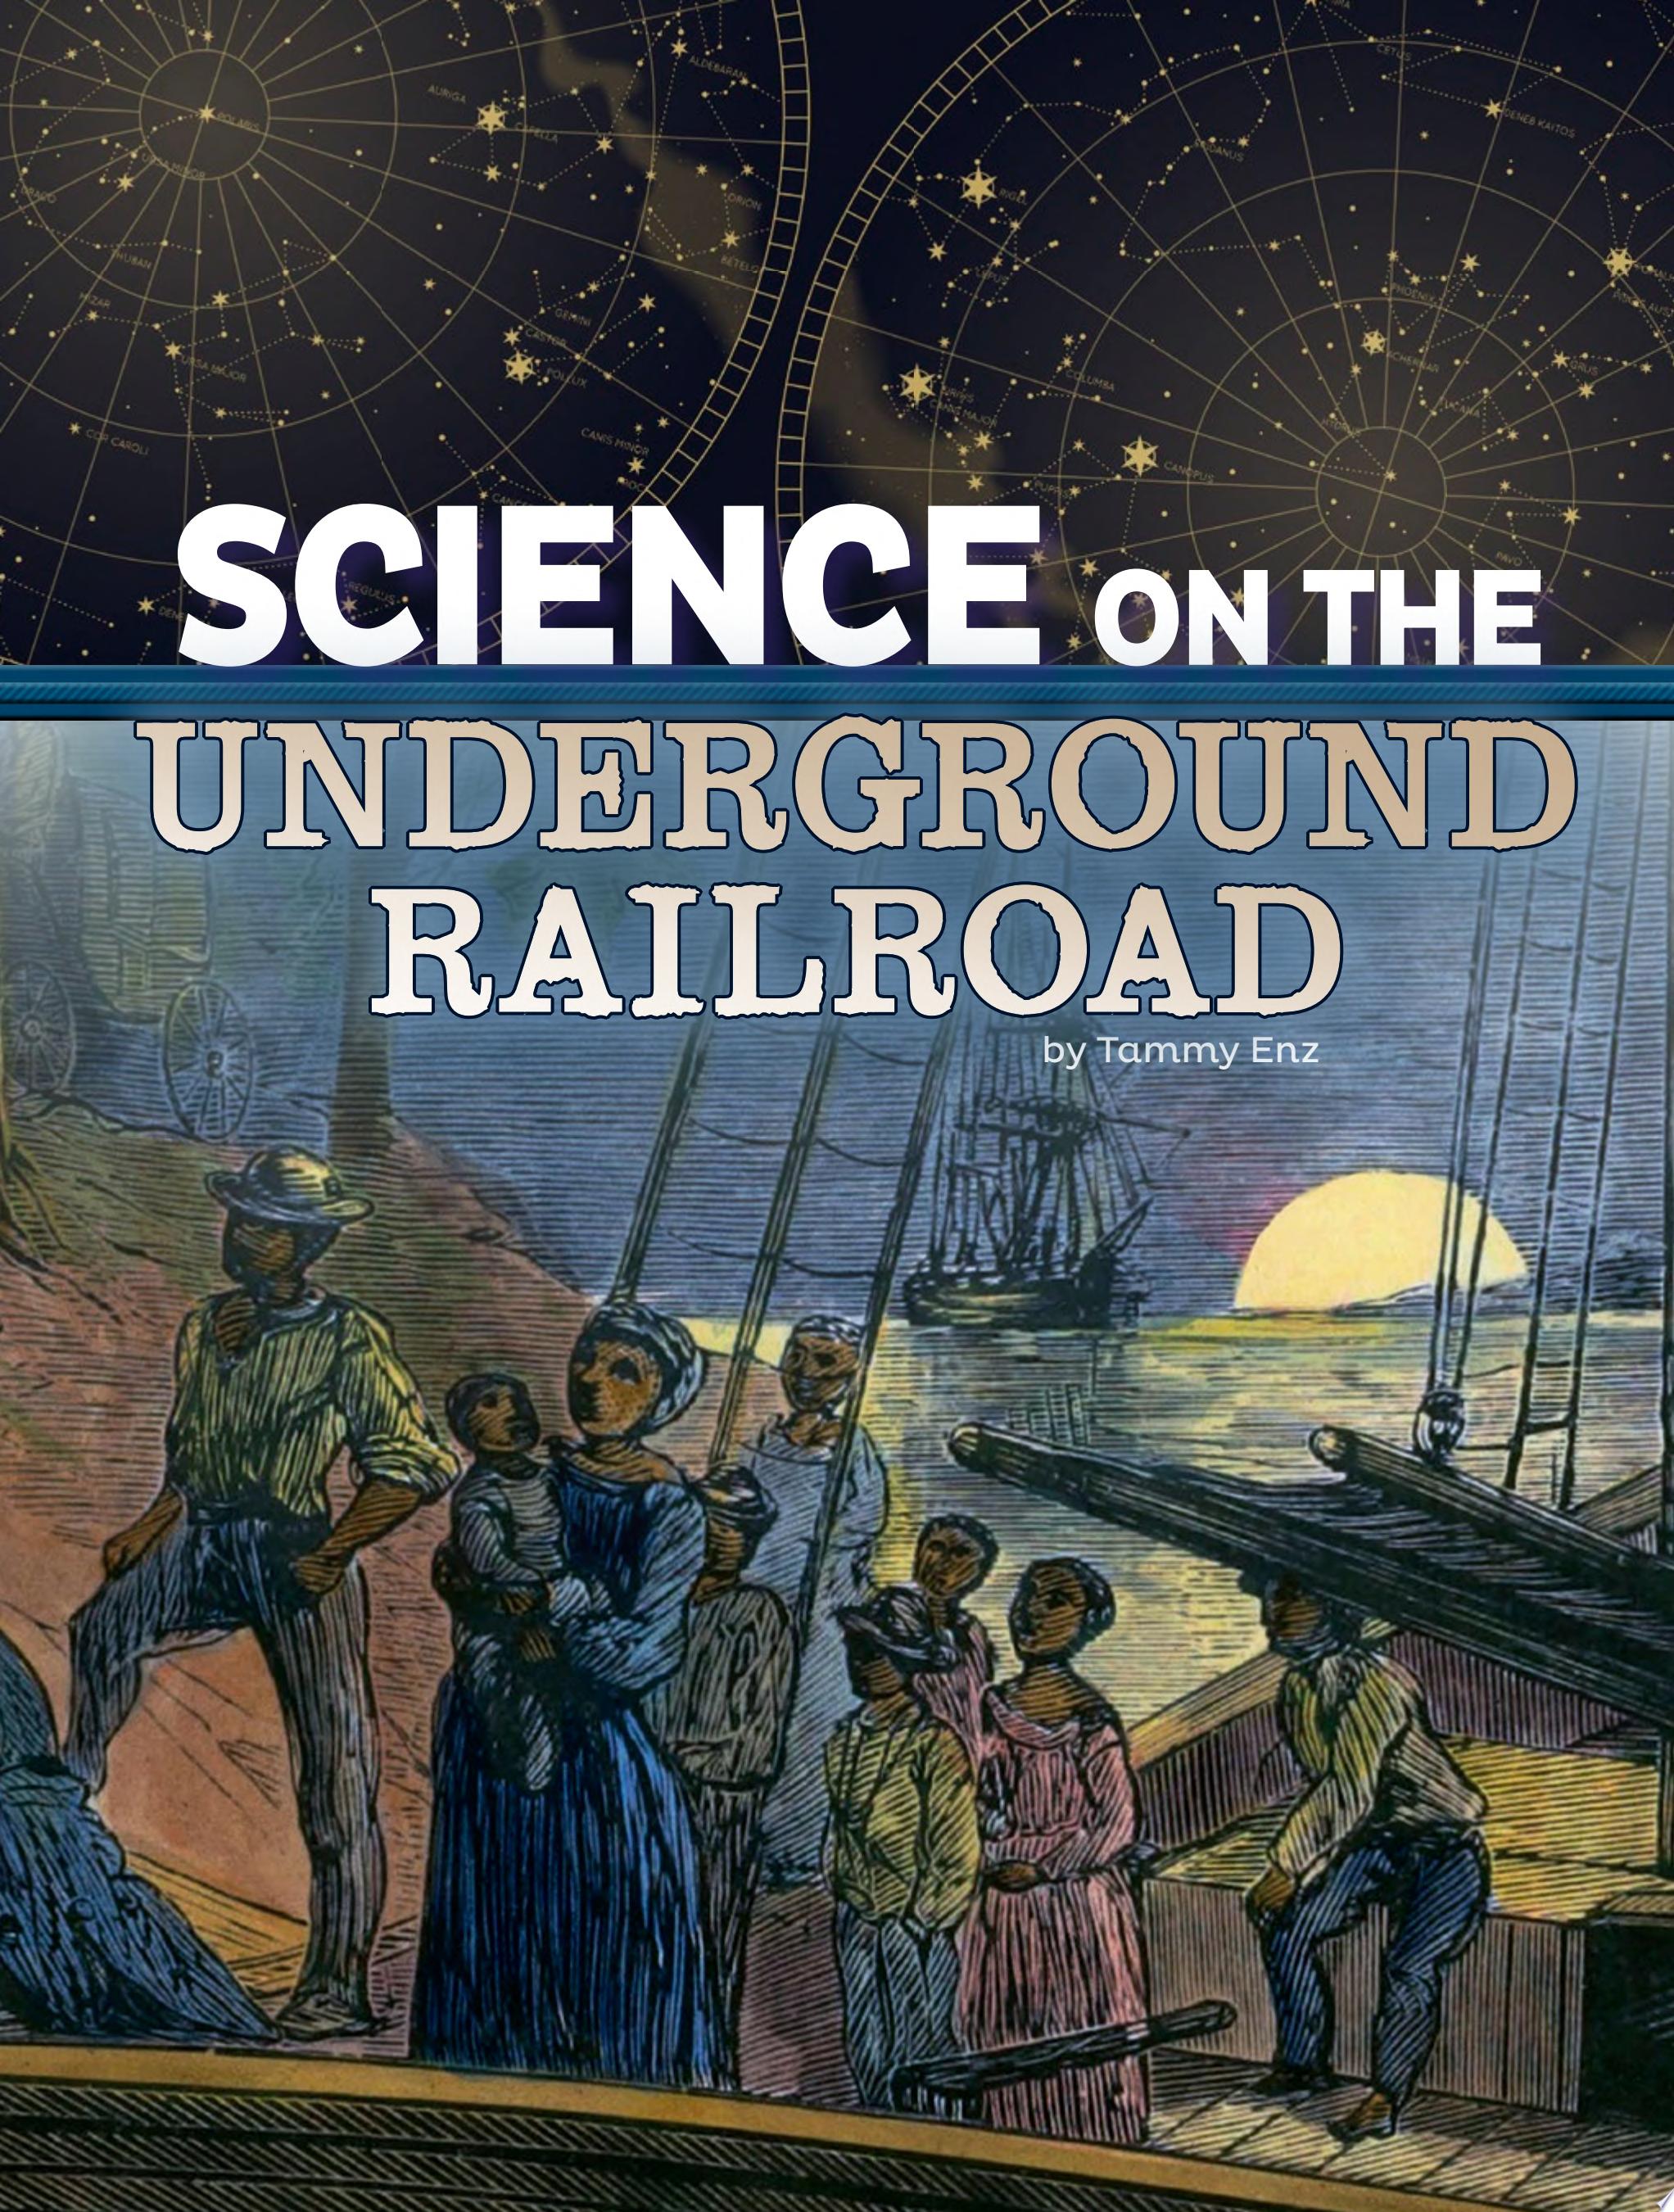 Image for "Science on the Underground Railroad"